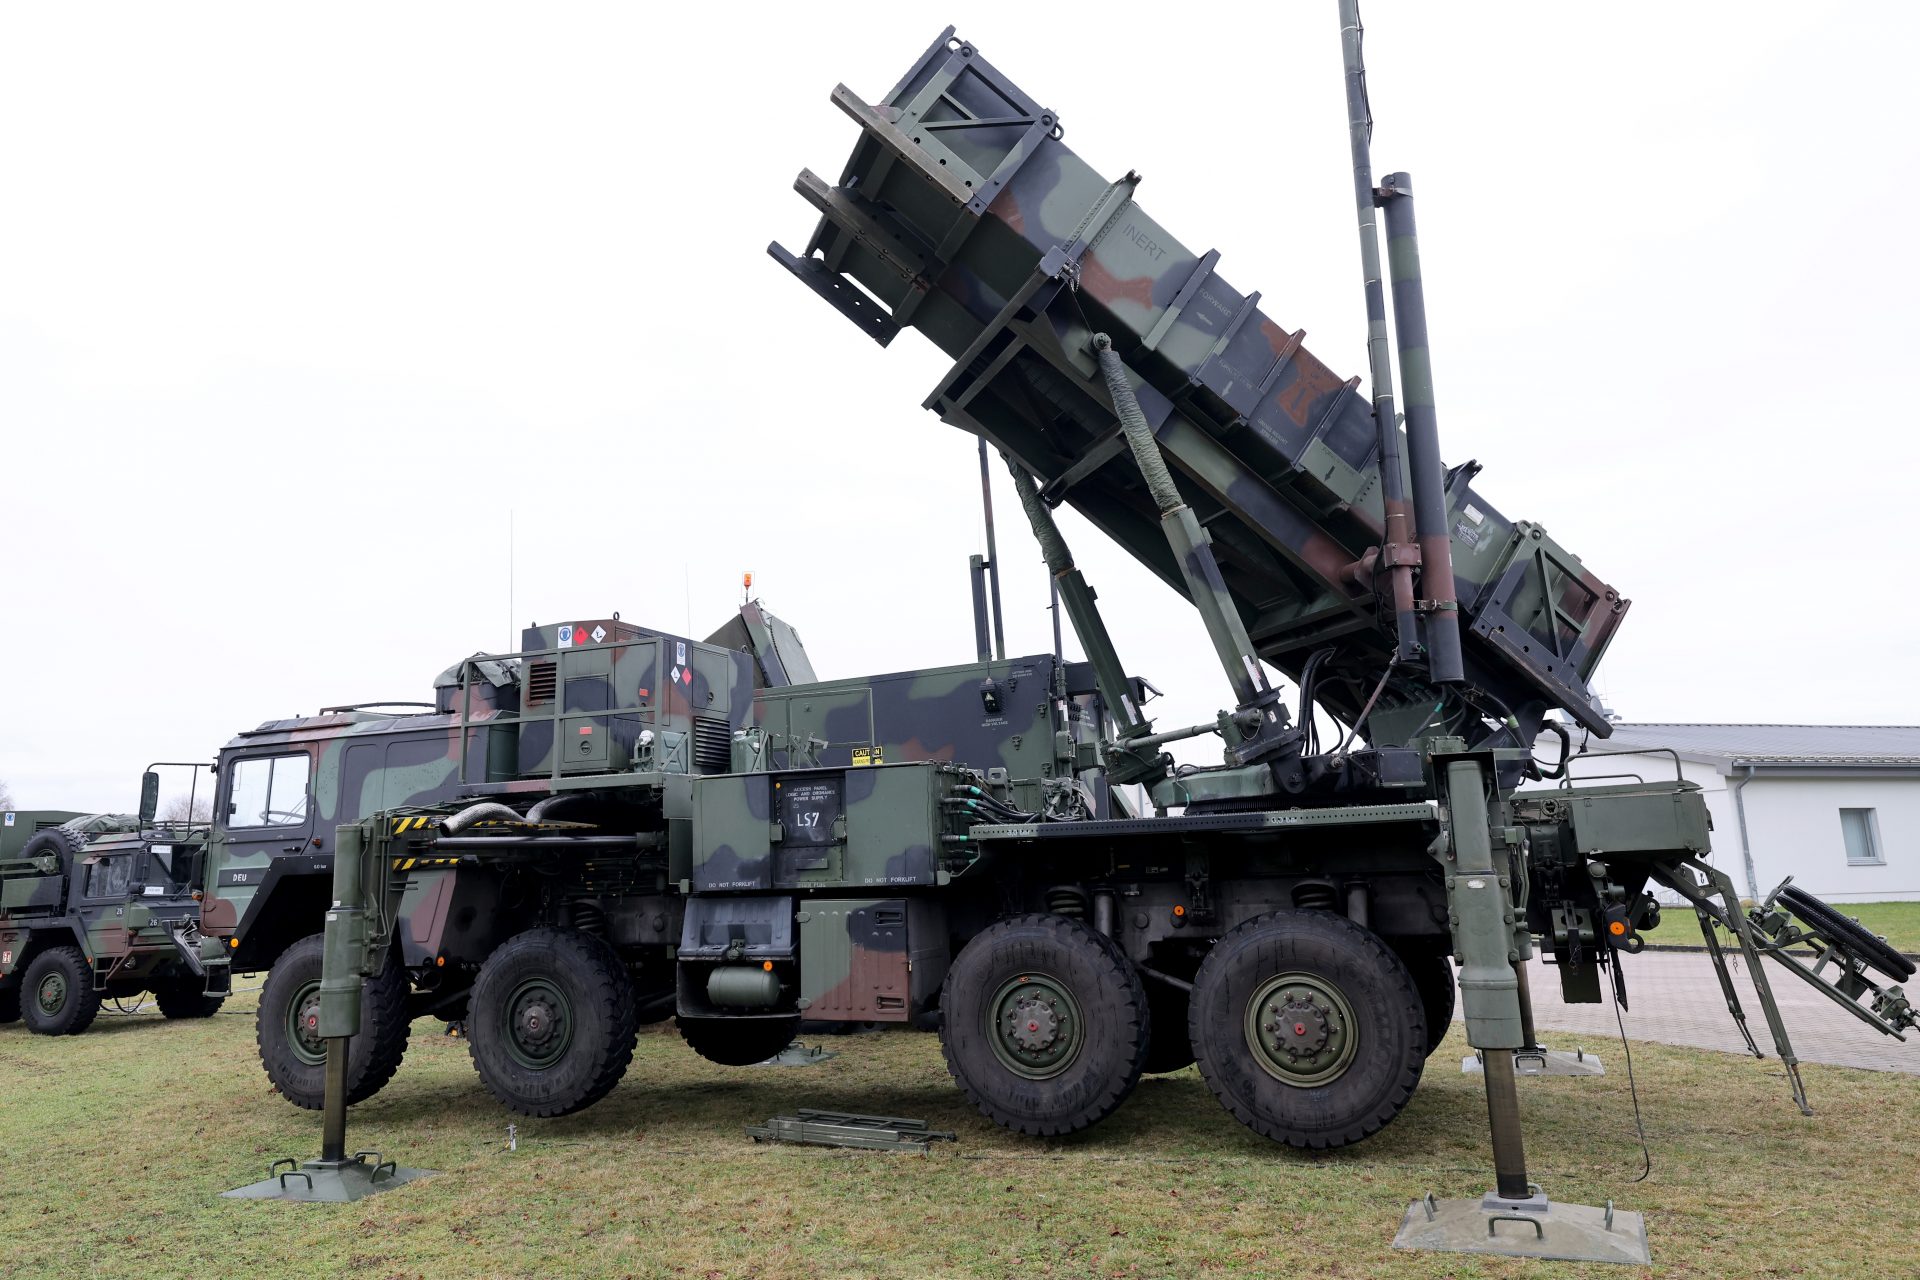 <p><span>The new plans will allow NATO member states to send their air defense equipment to Lithuania on a rotational basis, meaning each country will protect NATO airspace for a set period, though those details have yet to be released.</span></p>